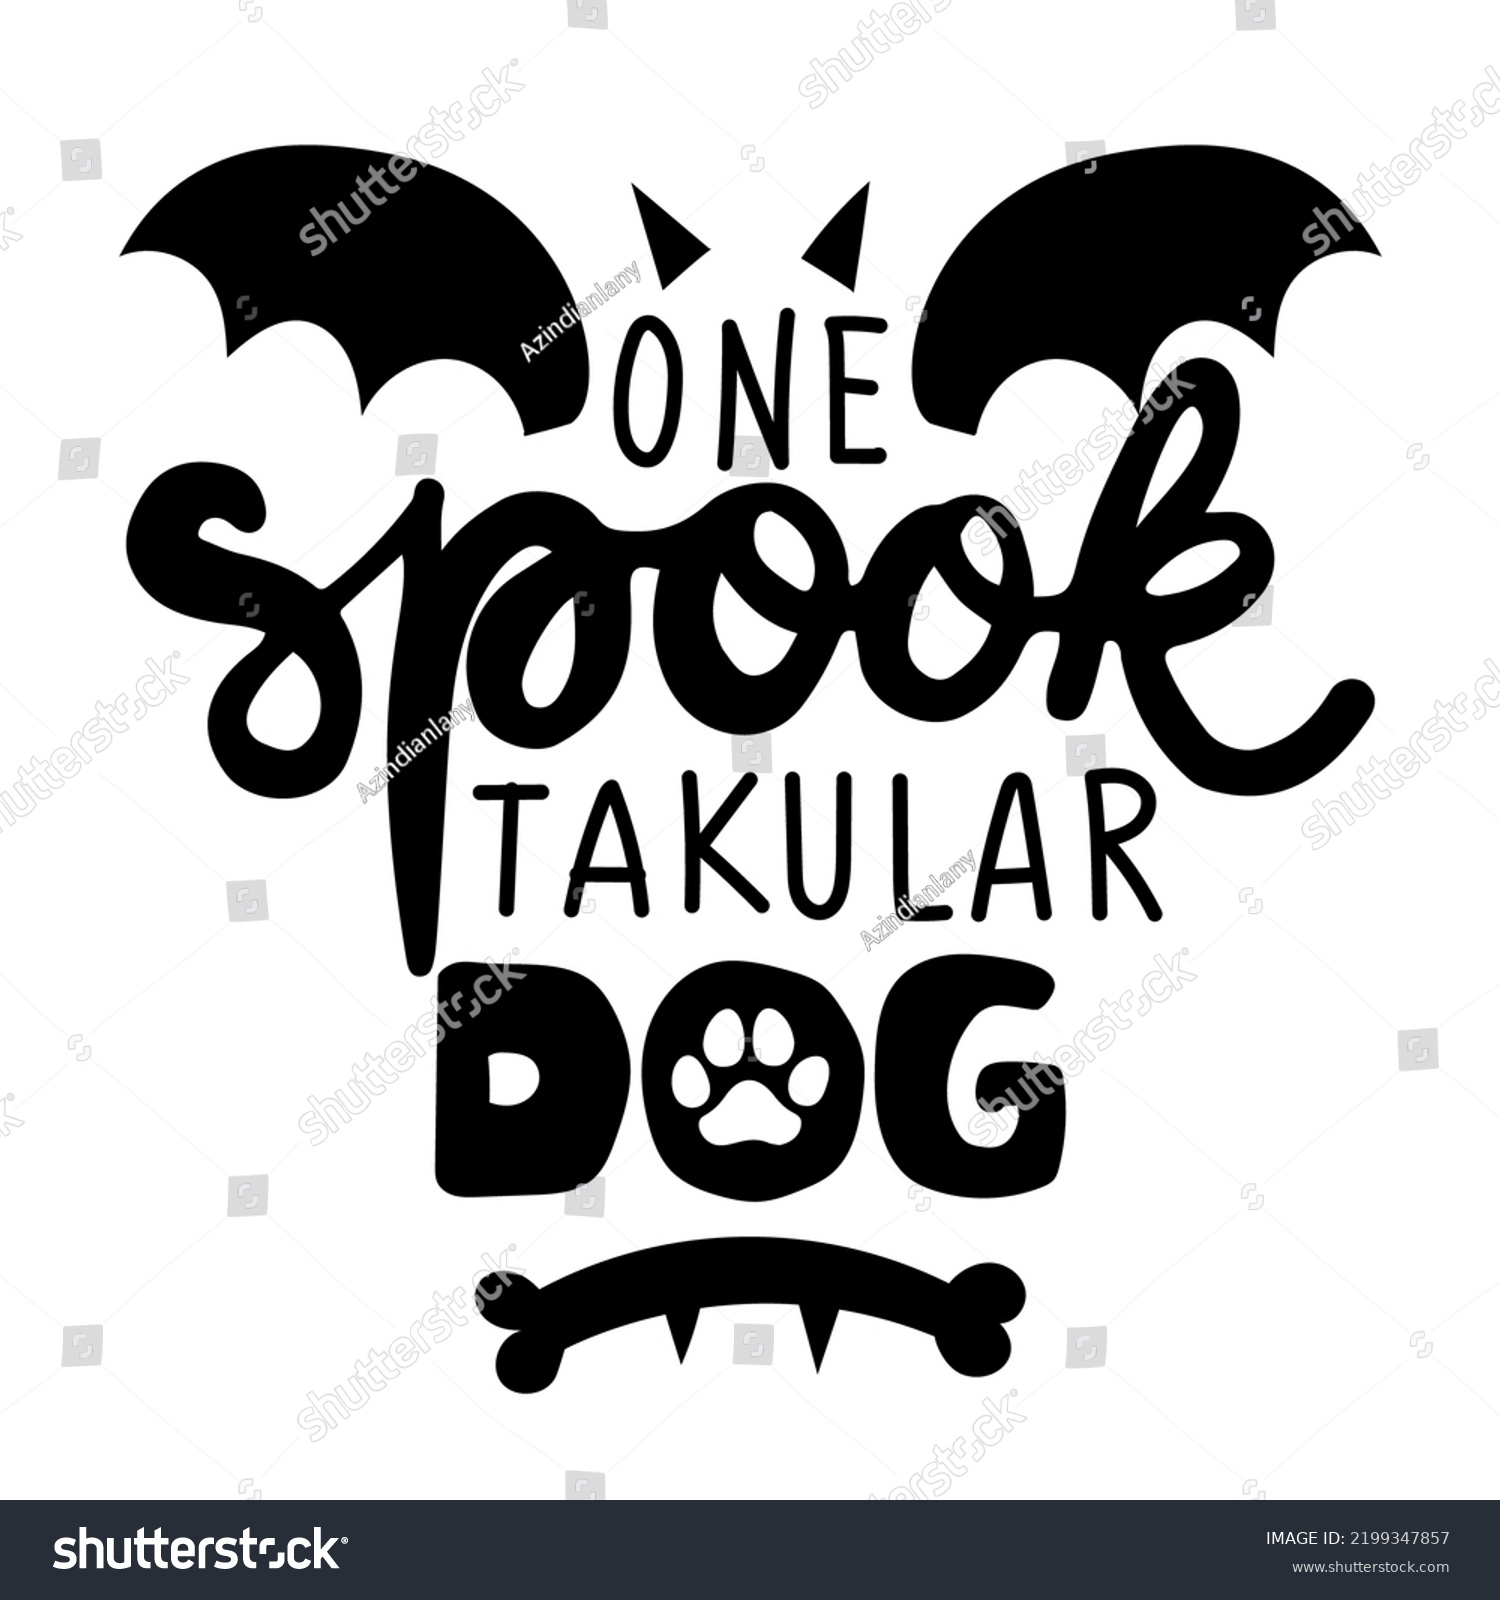 SVG of One Spooktacular Dog (spectacular) - words with dog footprint. - funny pet vector saying with puppy paw, heart and bone. Good for posters, textiles, gifts, t shirts. Halloween gift for dog lovers. svg